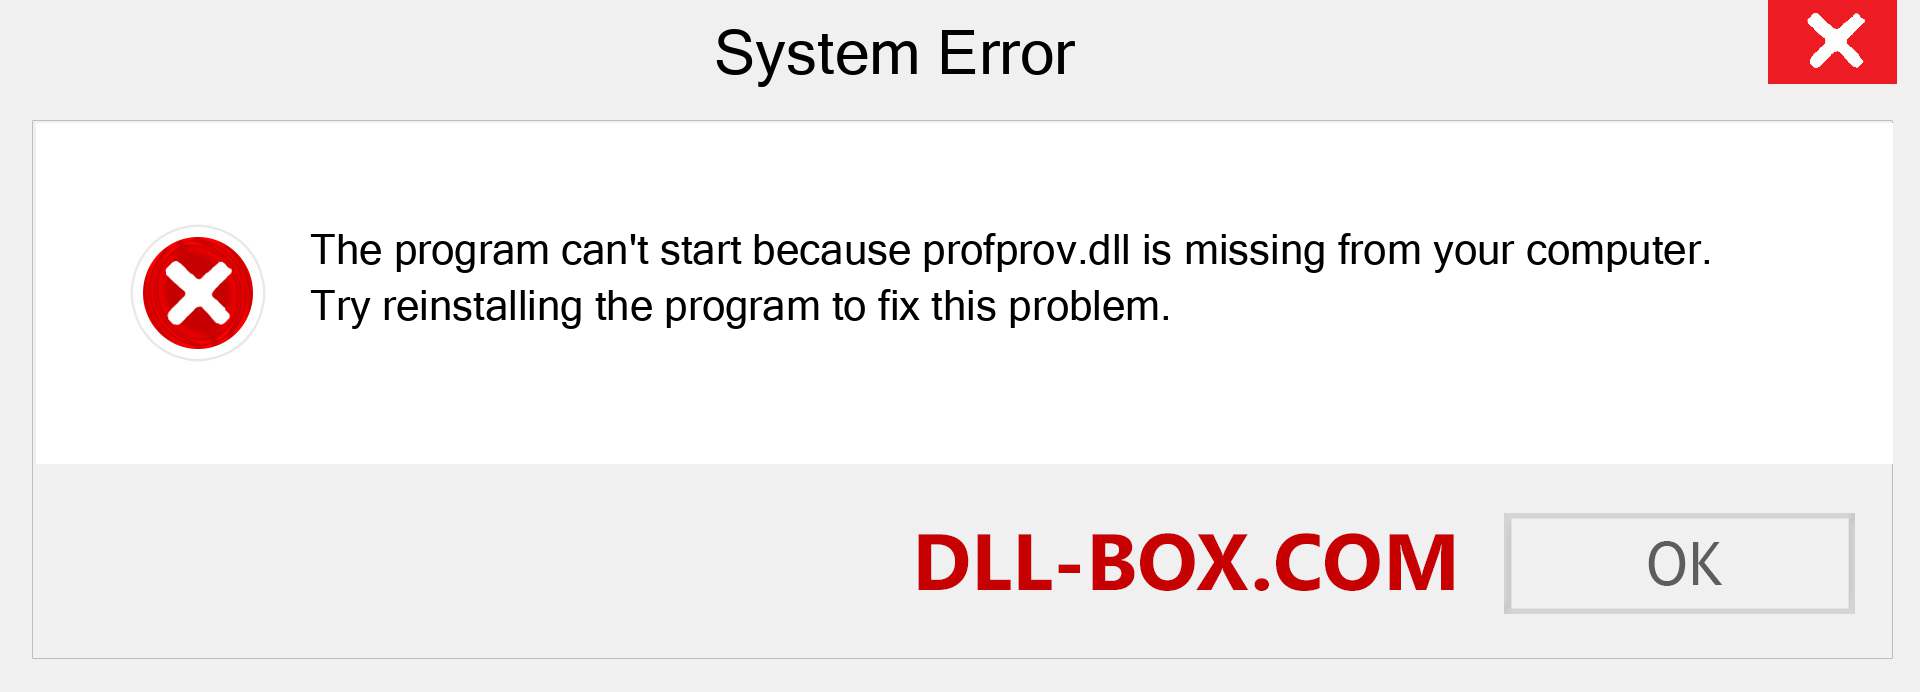  profprov.dll file is missing?. Download for Windows 7, 8, 10 - Fix  profprov dll Missing Error on Windows, photos, images